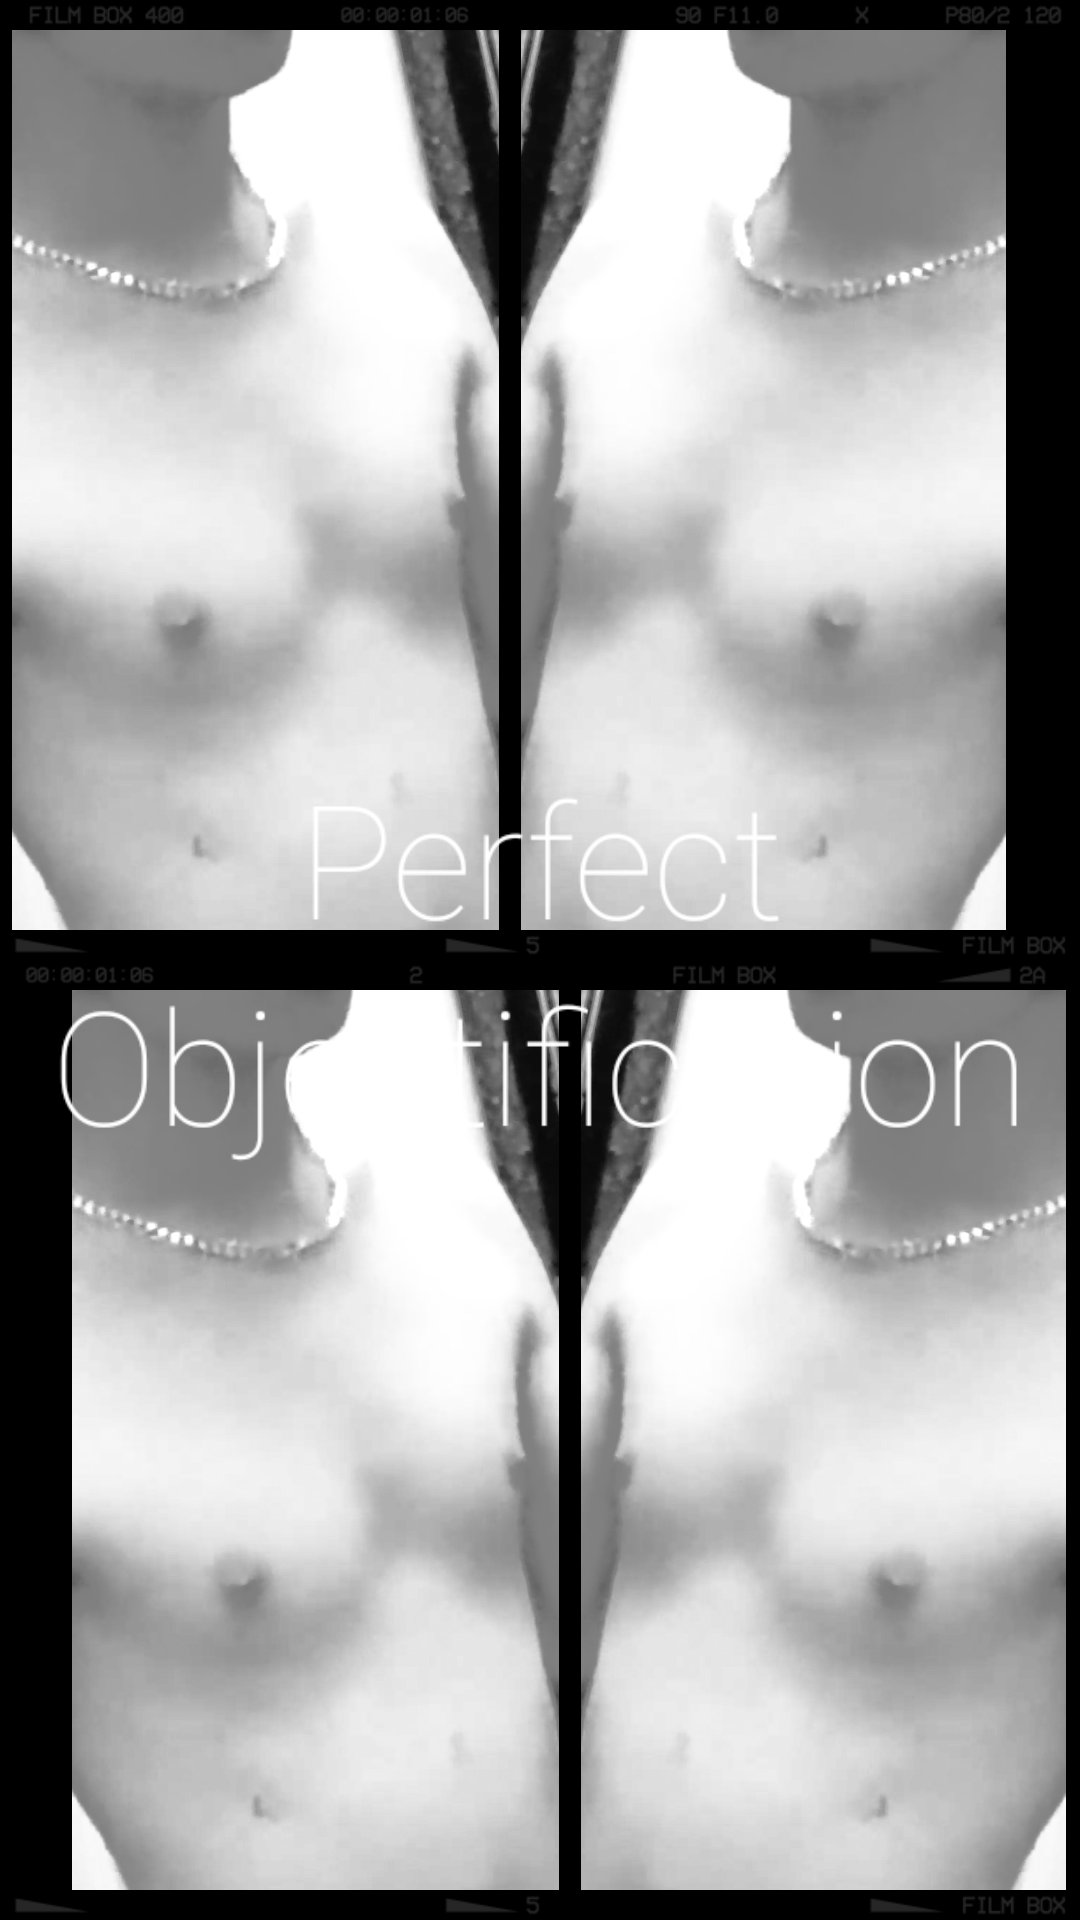 Perfect Objectification